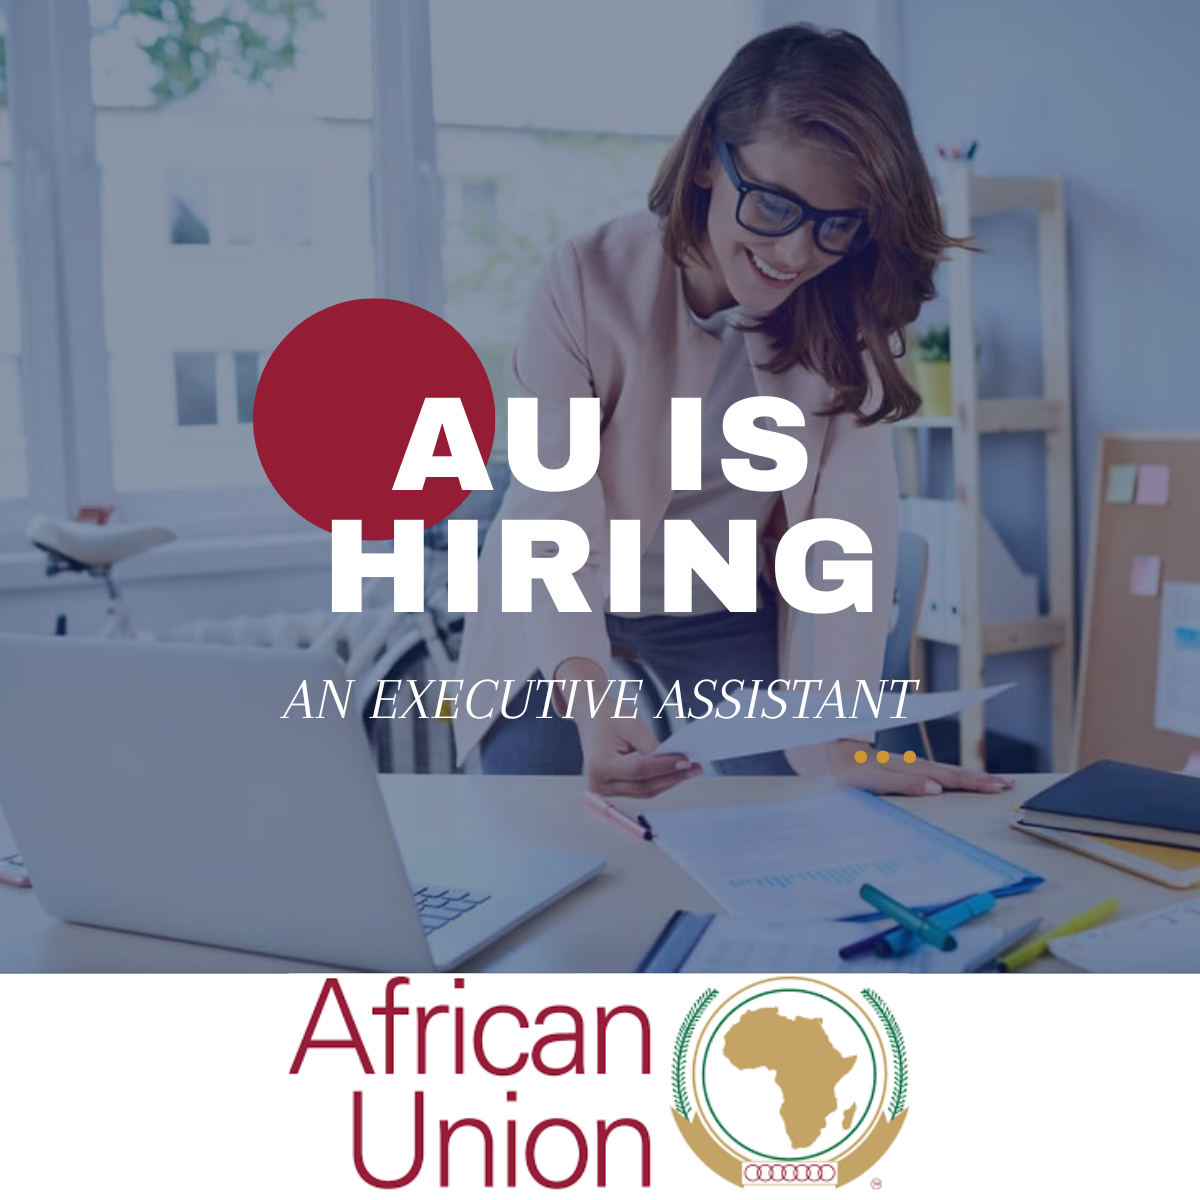 Africa Union (AU) Is Hiring An Executive Assistant. APPLY NOW